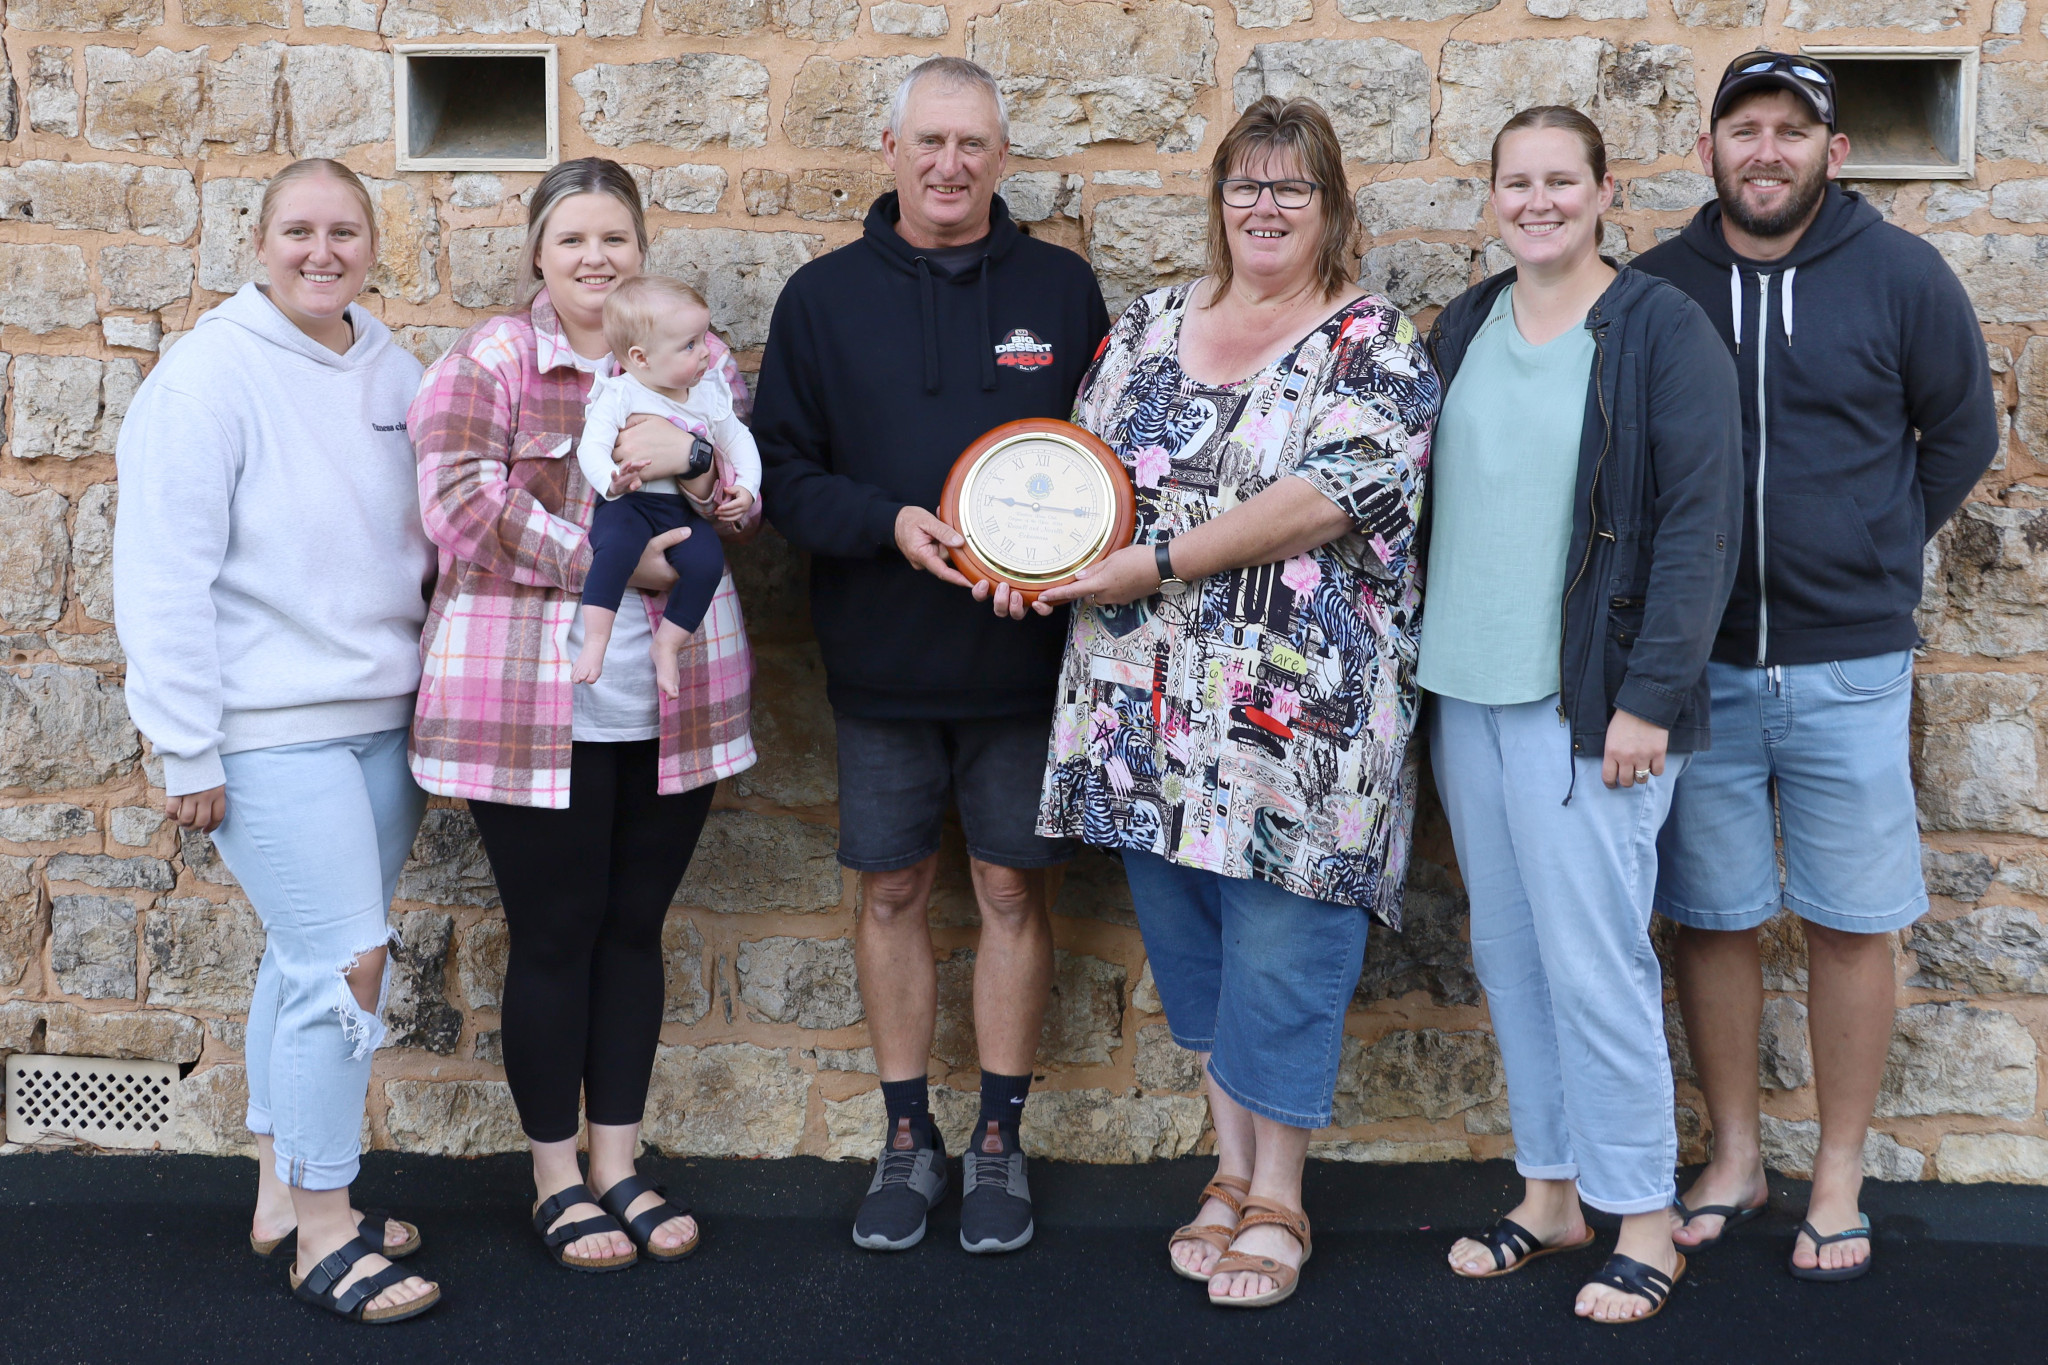 Russell and Norelle Eckermann with their family. From left: Bronte Eckermann, Hayley and Matilda McPhee, Russell Eckermann, Norelle Eckermann, Shelby Appledore and Ashley Eckermann